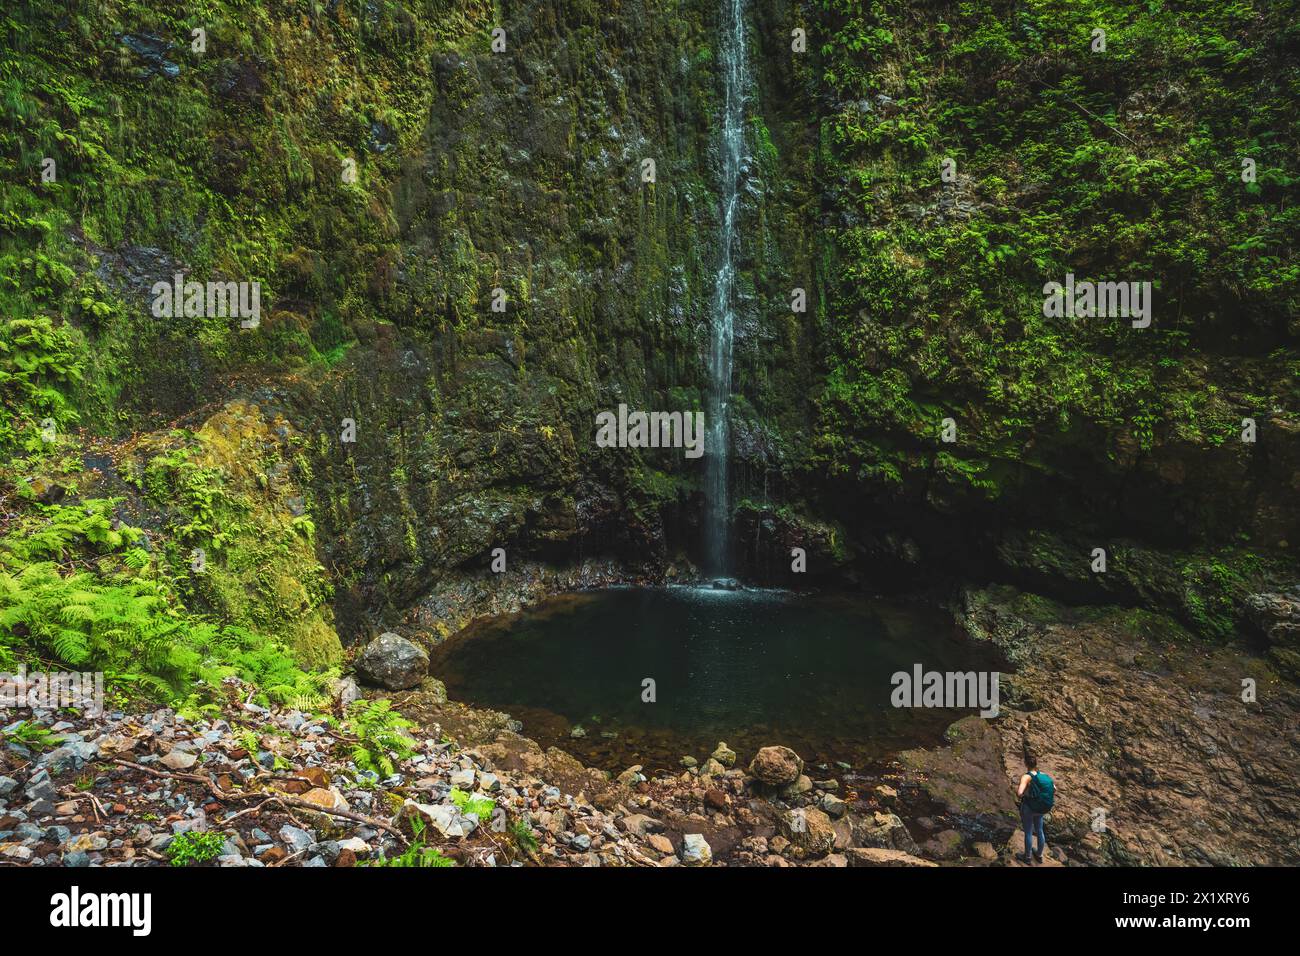 Description: Backpacker tourist enjoys standing in front of a picturesque waterfall pool overgrown with plants in Madeira rainforest. Levada of Caldei Stock Photo